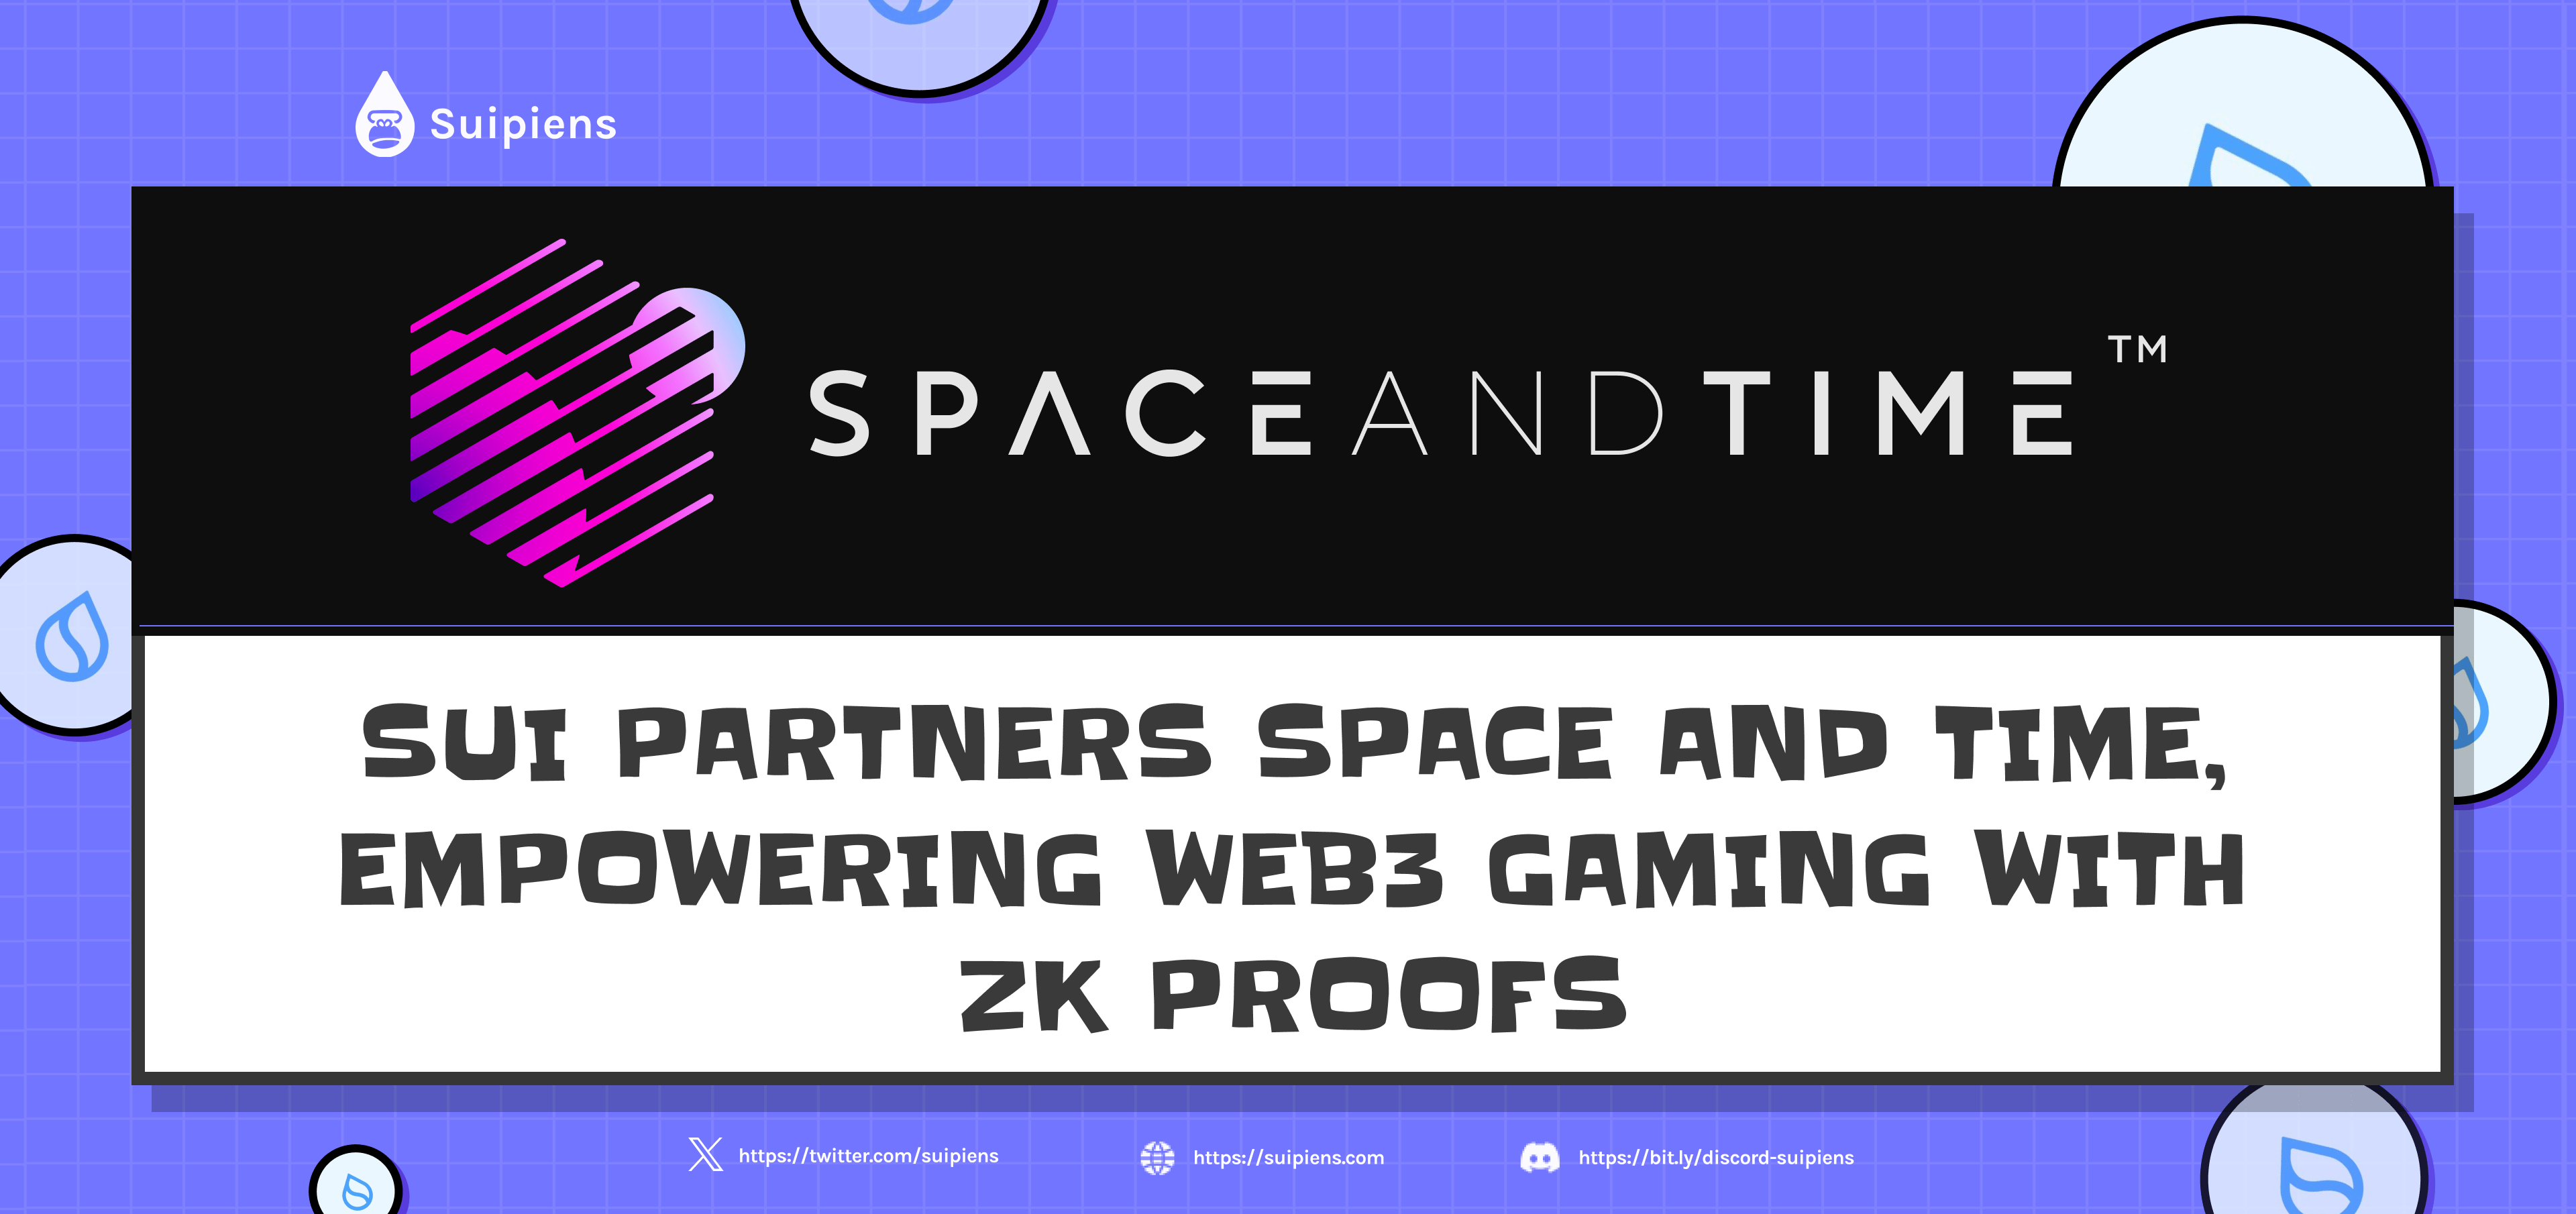 Sui Partners Space and Time, Empowering Web3 Gaming with ZK Proofs